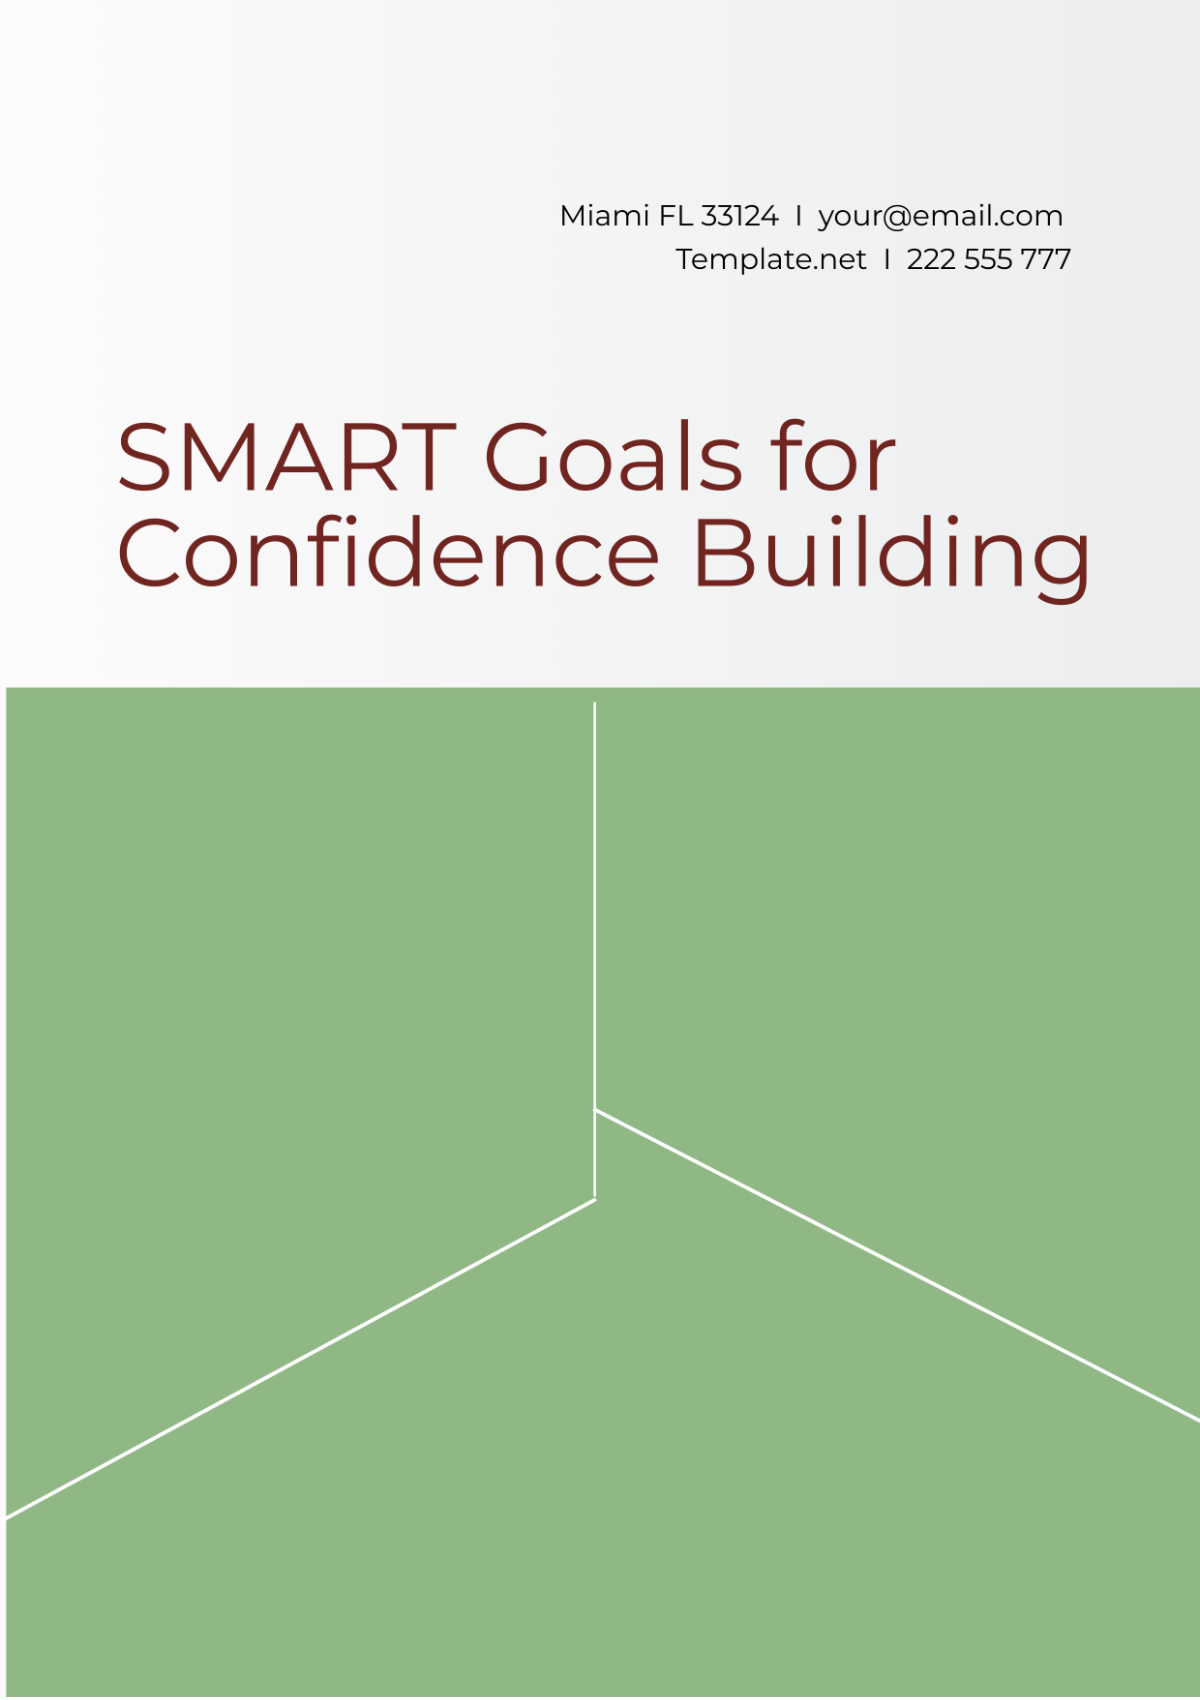 Free SMART Goals Template for Confidence Building